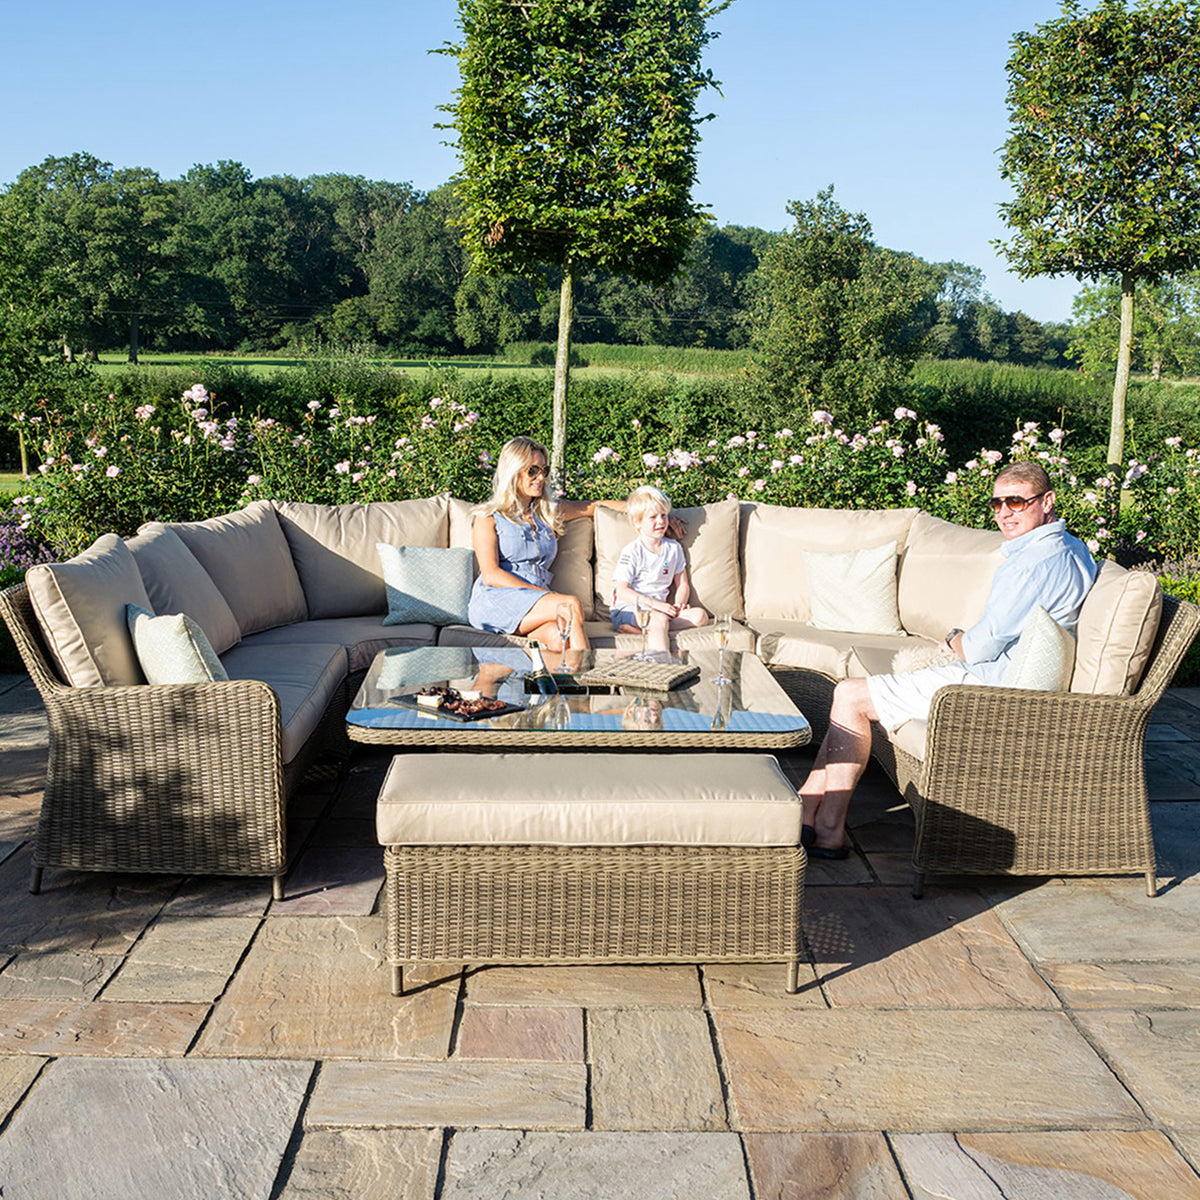 Maze Winchester Royal U-Shaped Rattan Sofa Set with Rising Table